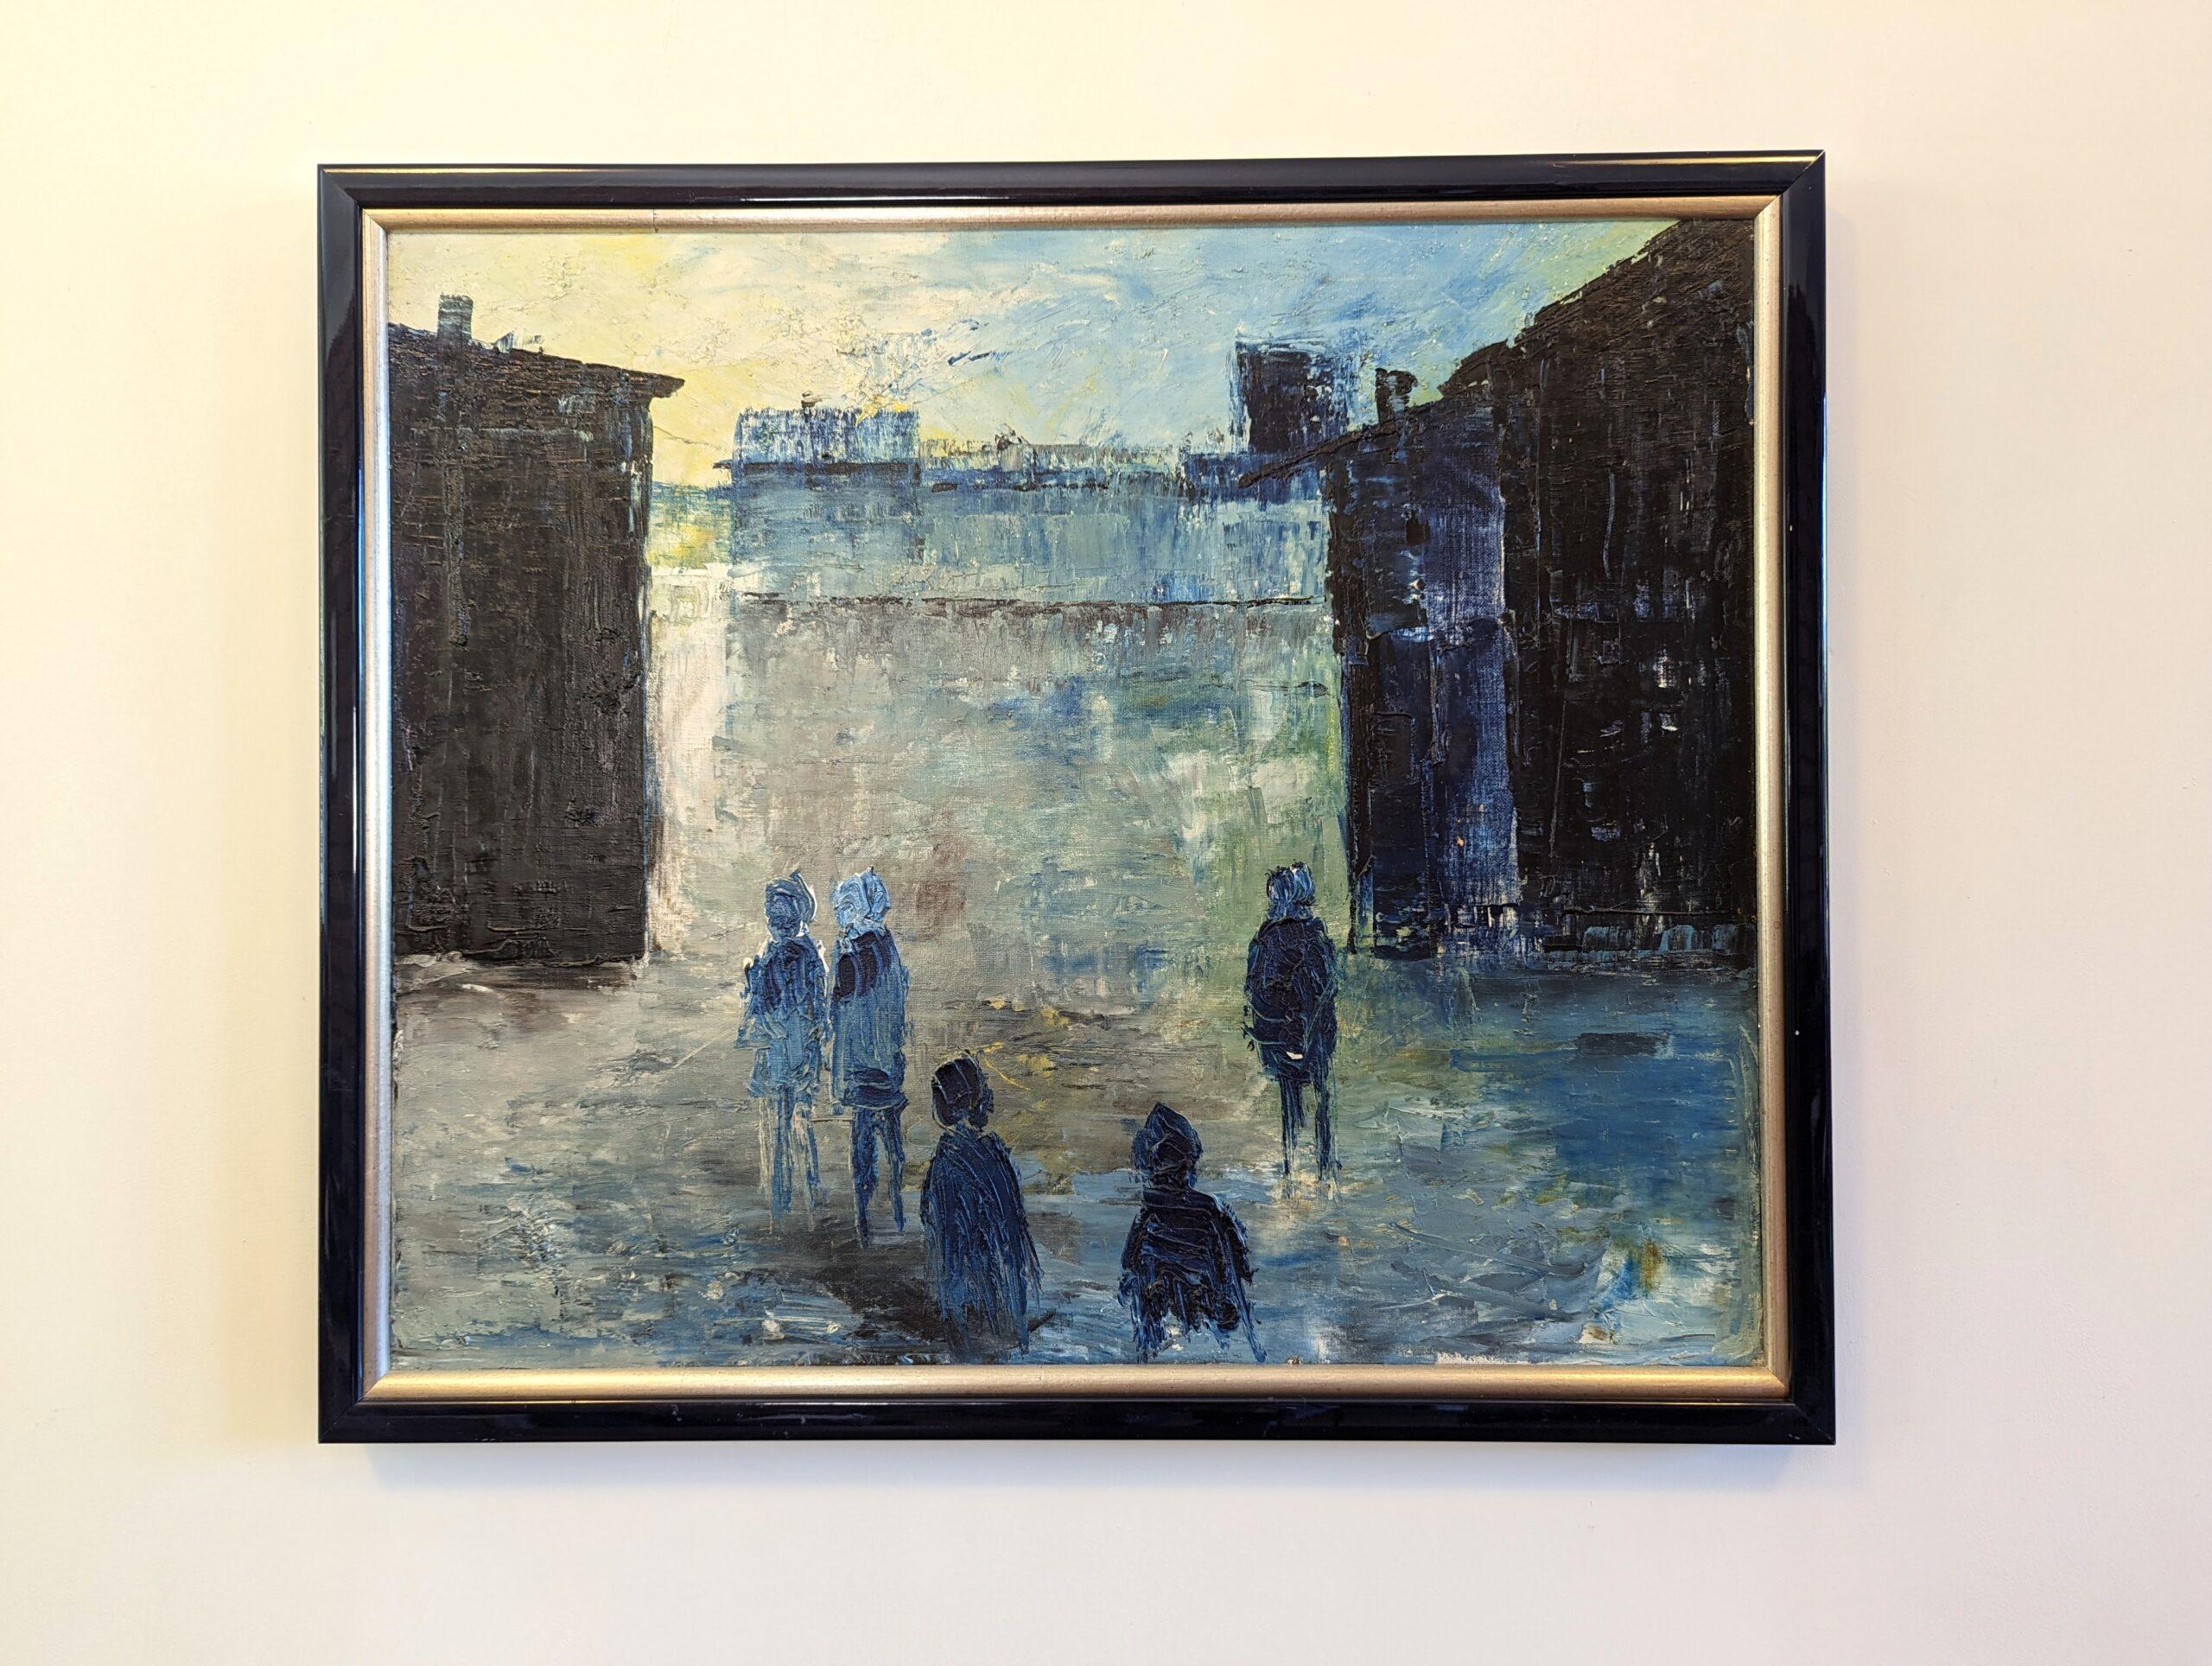 CITY DREAM
Size: 56.5 x 66cm (including frame)
Oil on canvas

A poignant and atmospheric mid-century cityscape composition, executed in oil onto canvas.

In the foreground, a group of figures stand together, with their backs turned to the viewer as